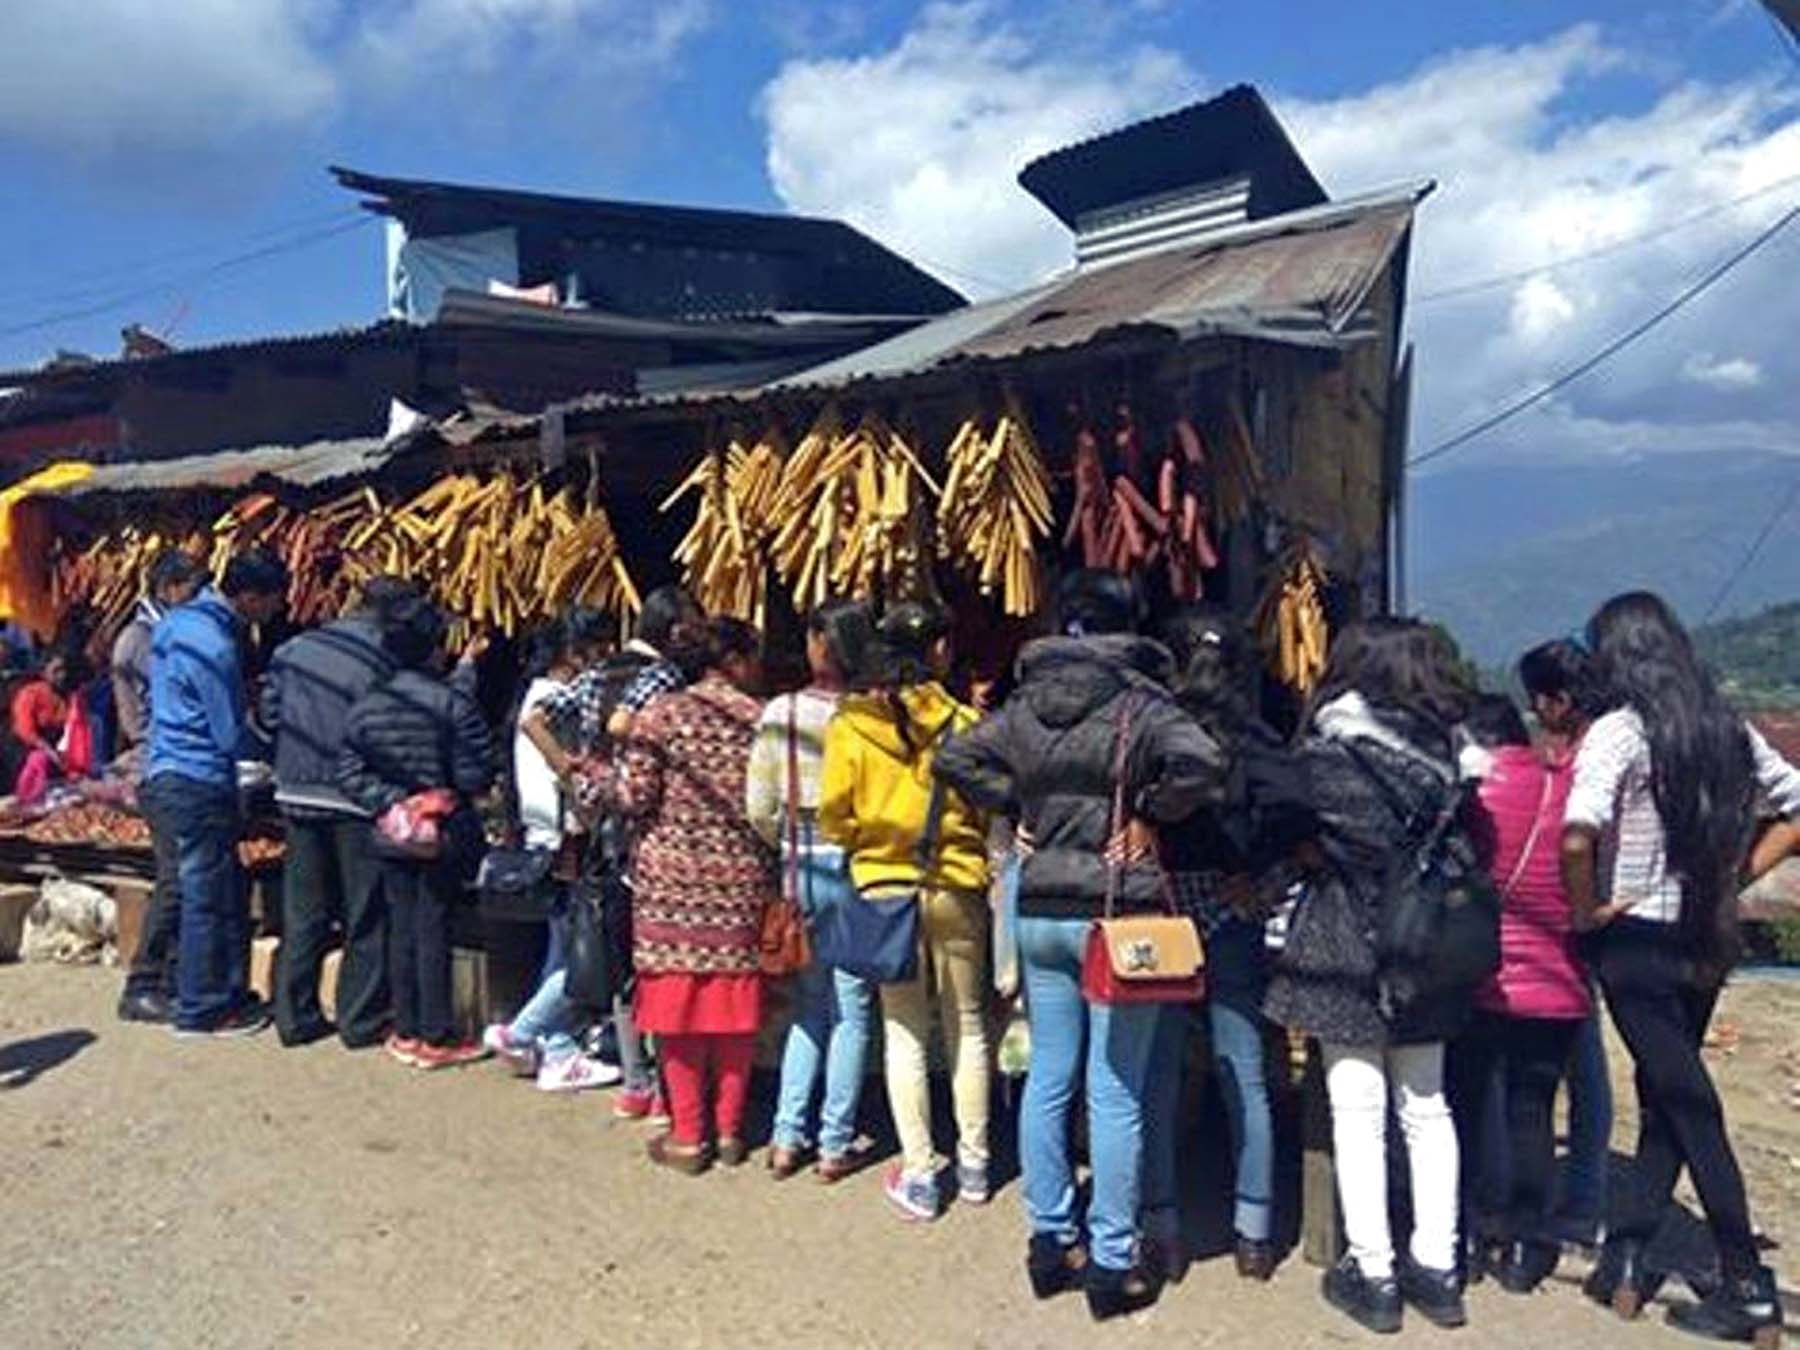 Love for chhurpi in Ilam - The Himalayan Times - Nepal&#39;s No.1 English Daily  Newspaper | Nepal News, Latest Politics, Business, World, Sports,  Entertainment, Travel, Life Style News